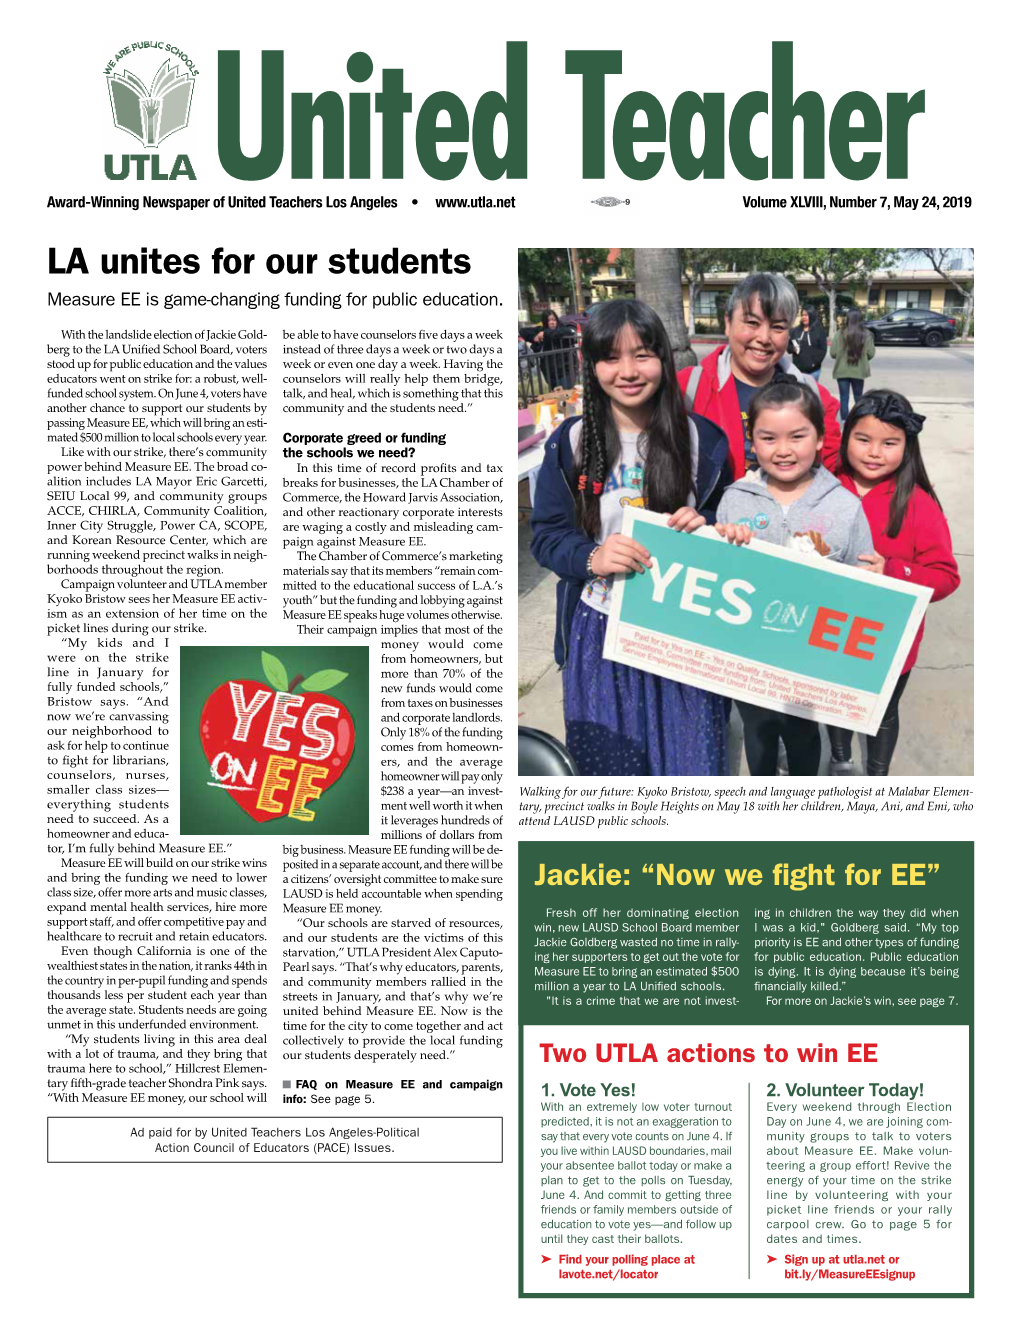 LA Unites for Our Students Measure EE Is Game-Changing Funding for Public Education